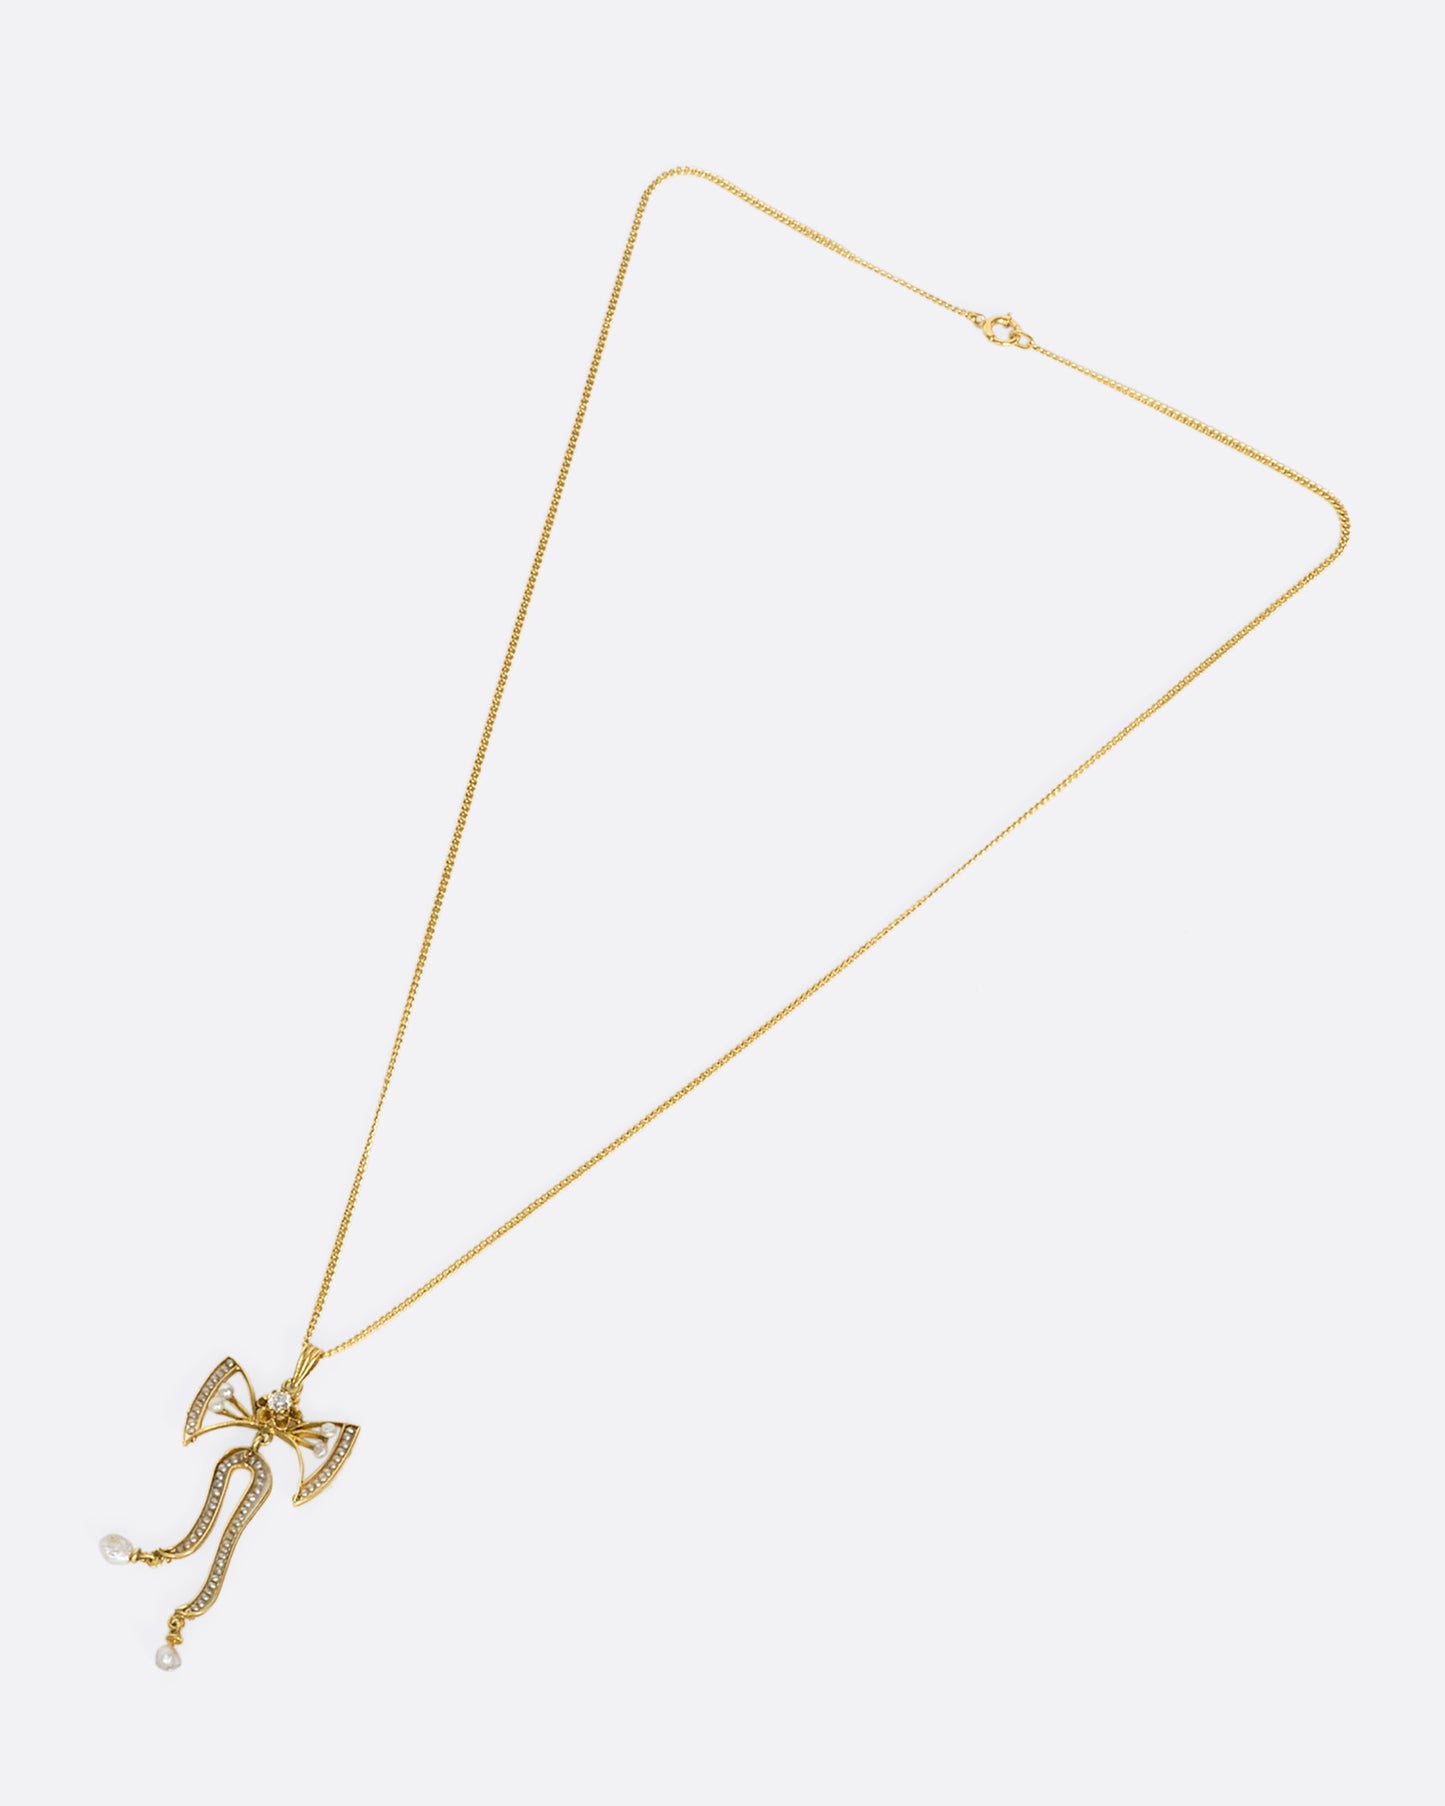 An overhead view of a yellow gold bow pendant with seed pearls and a diamond laying down flat with the chain pulled out in a triangular formation.